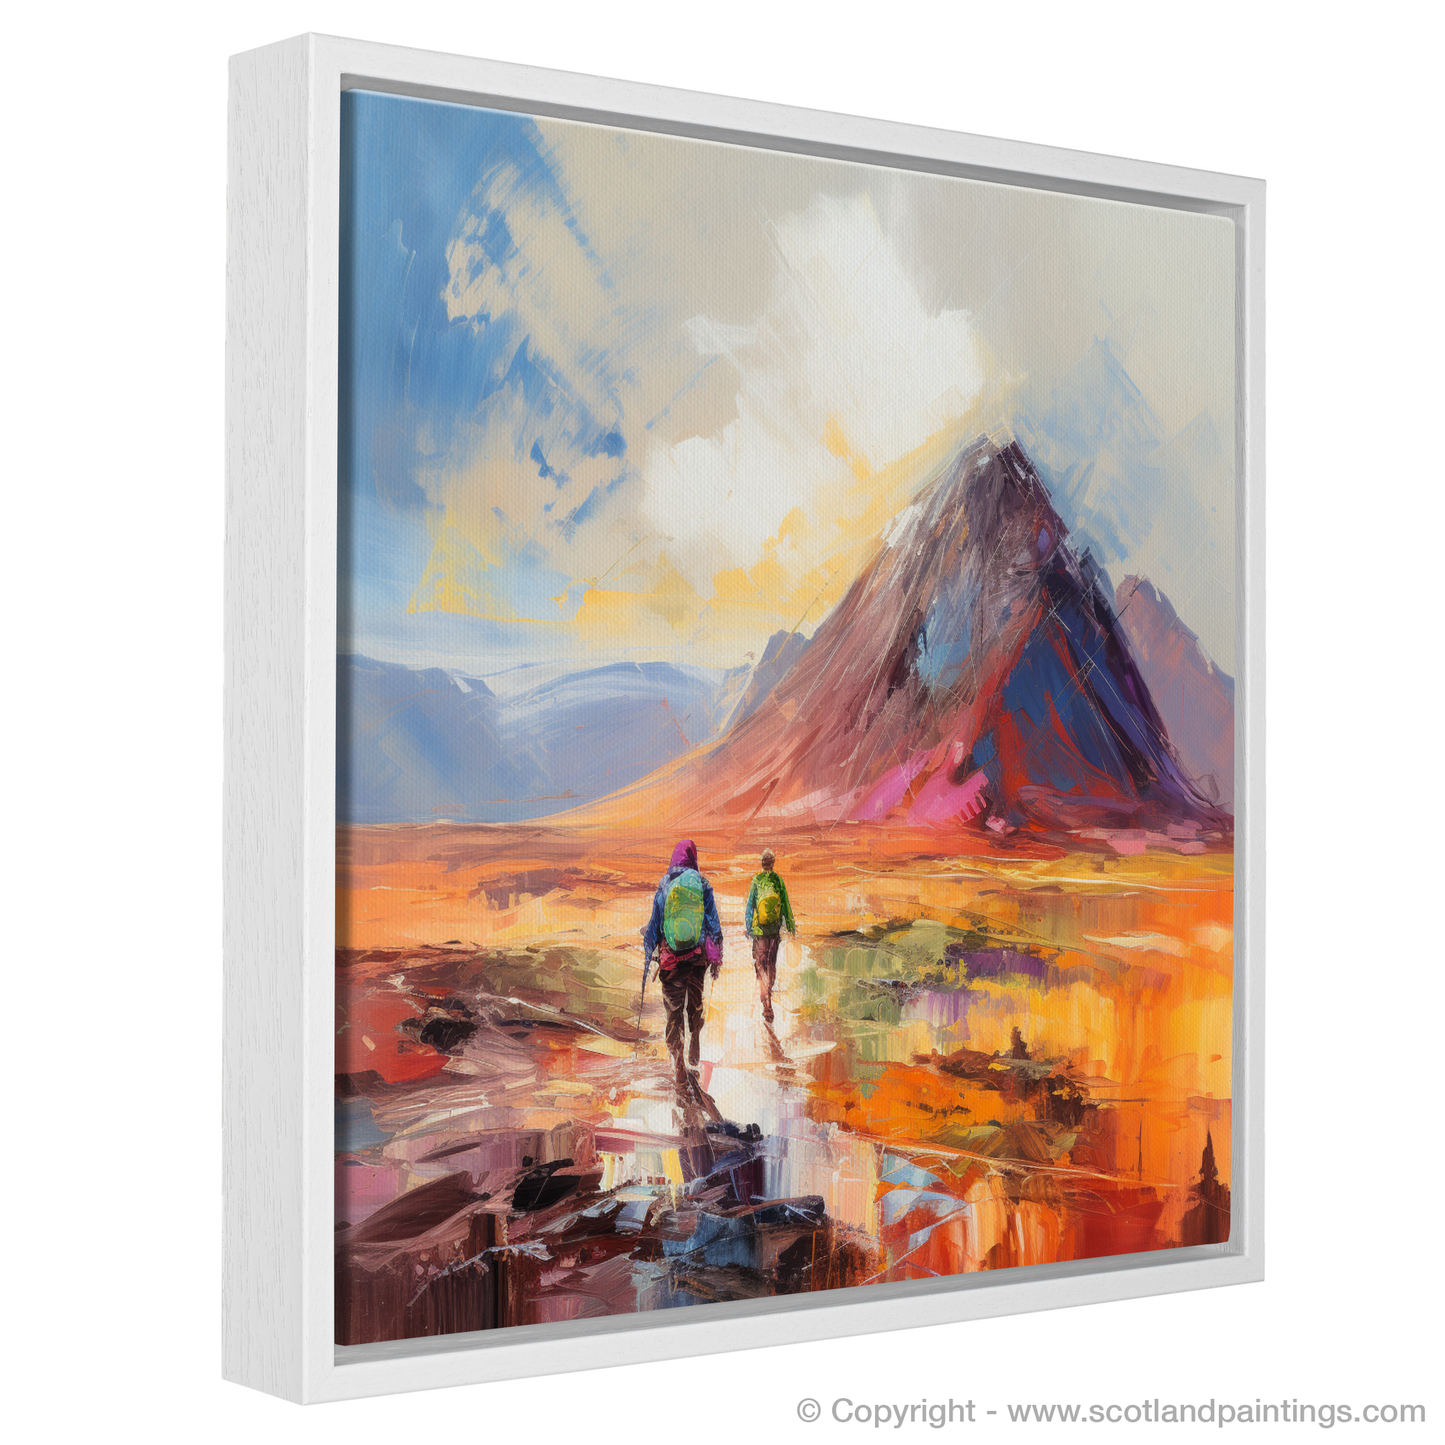 Highland Hikers: A Colour Field Tribute to Buachaille Summit in Glencoe